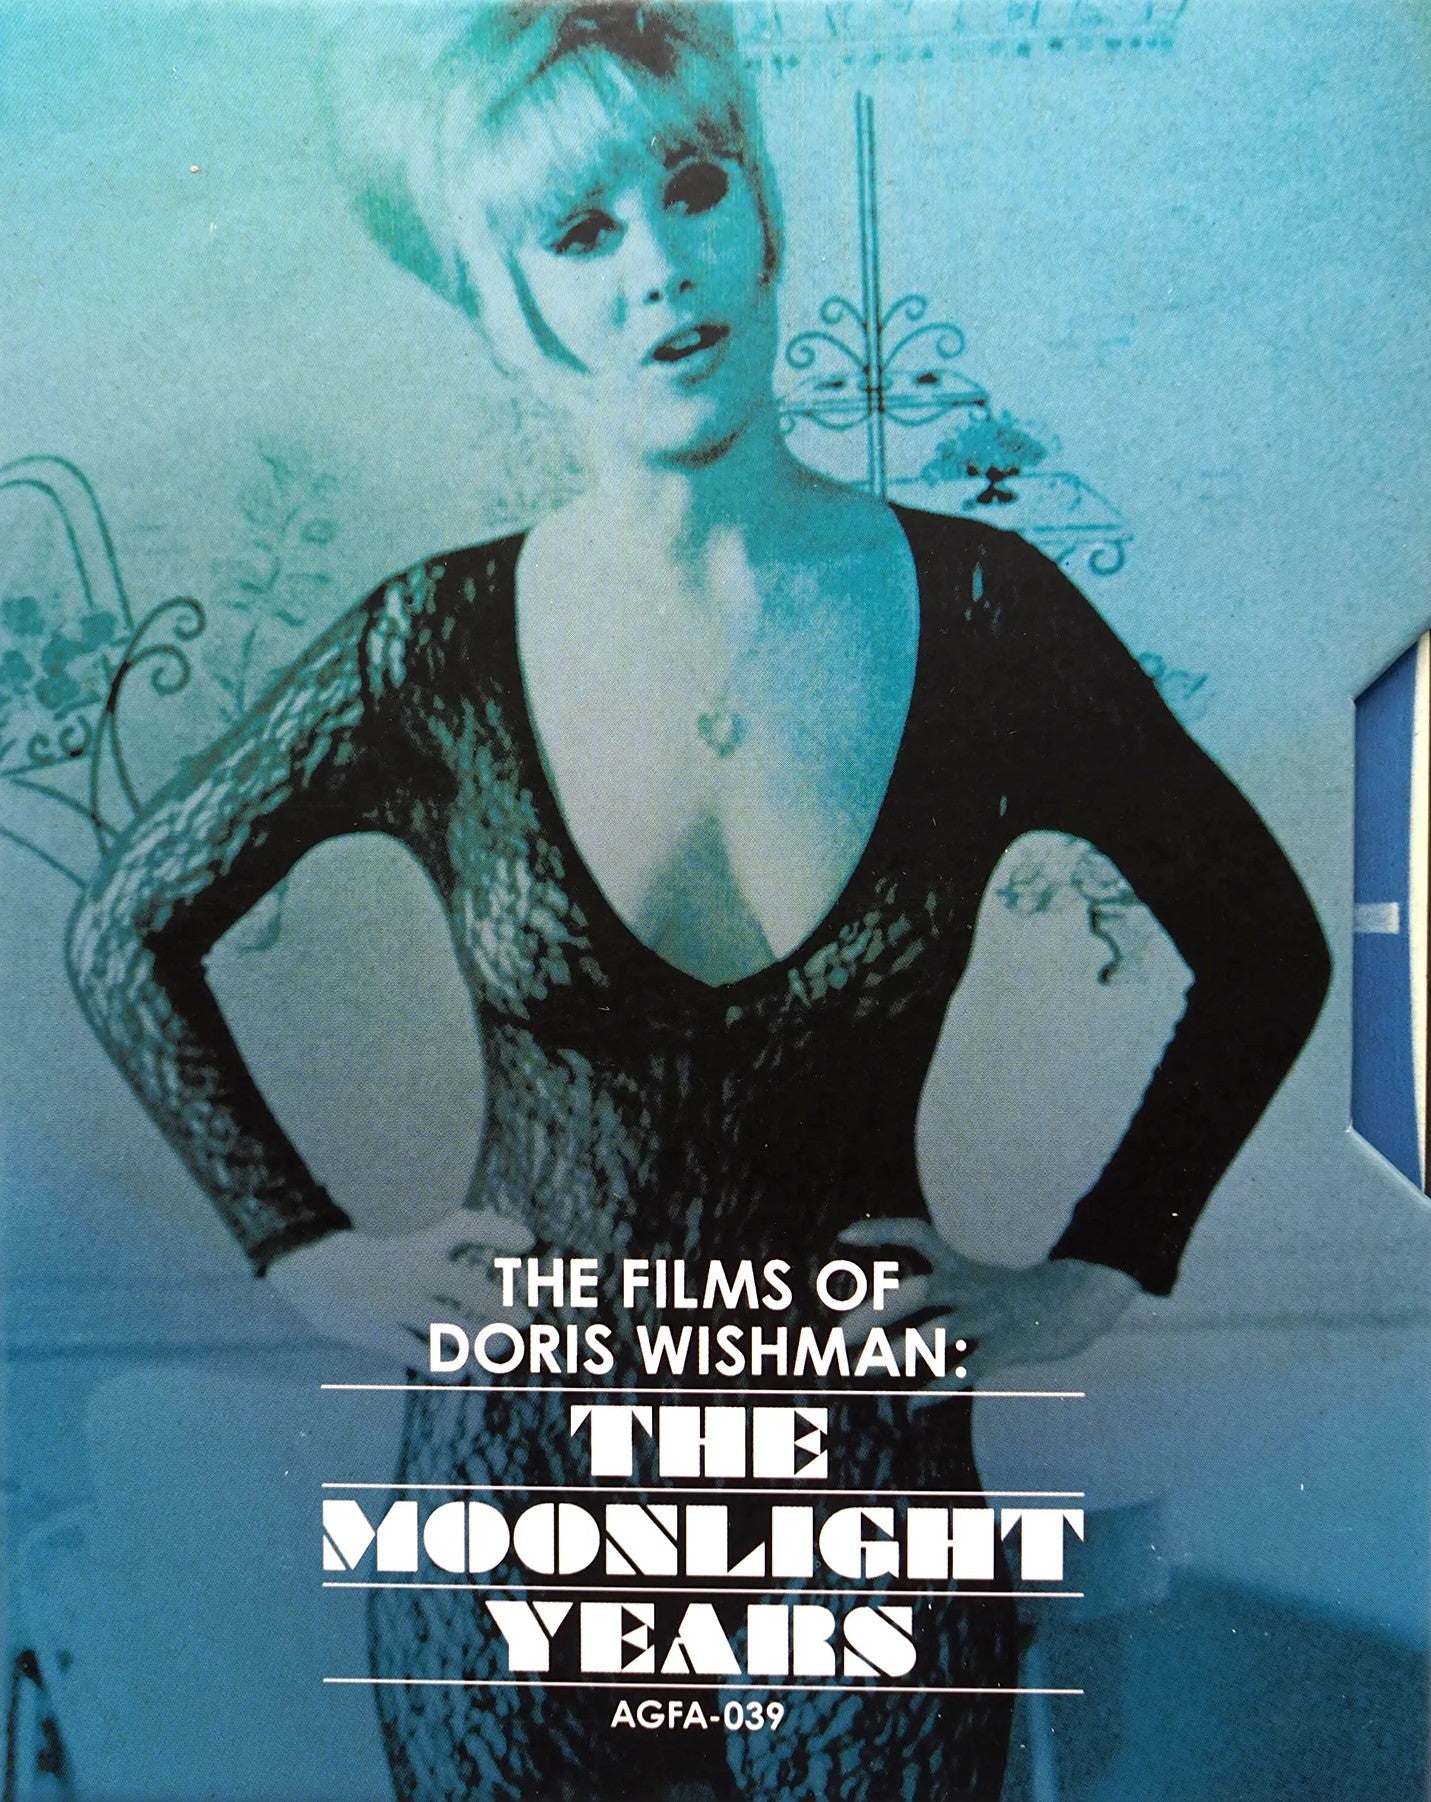 THE FILMS OF DORIS WISHMAN: THE MOONLIGHT YEARS (LIMITED EDITION) BLU-RAY